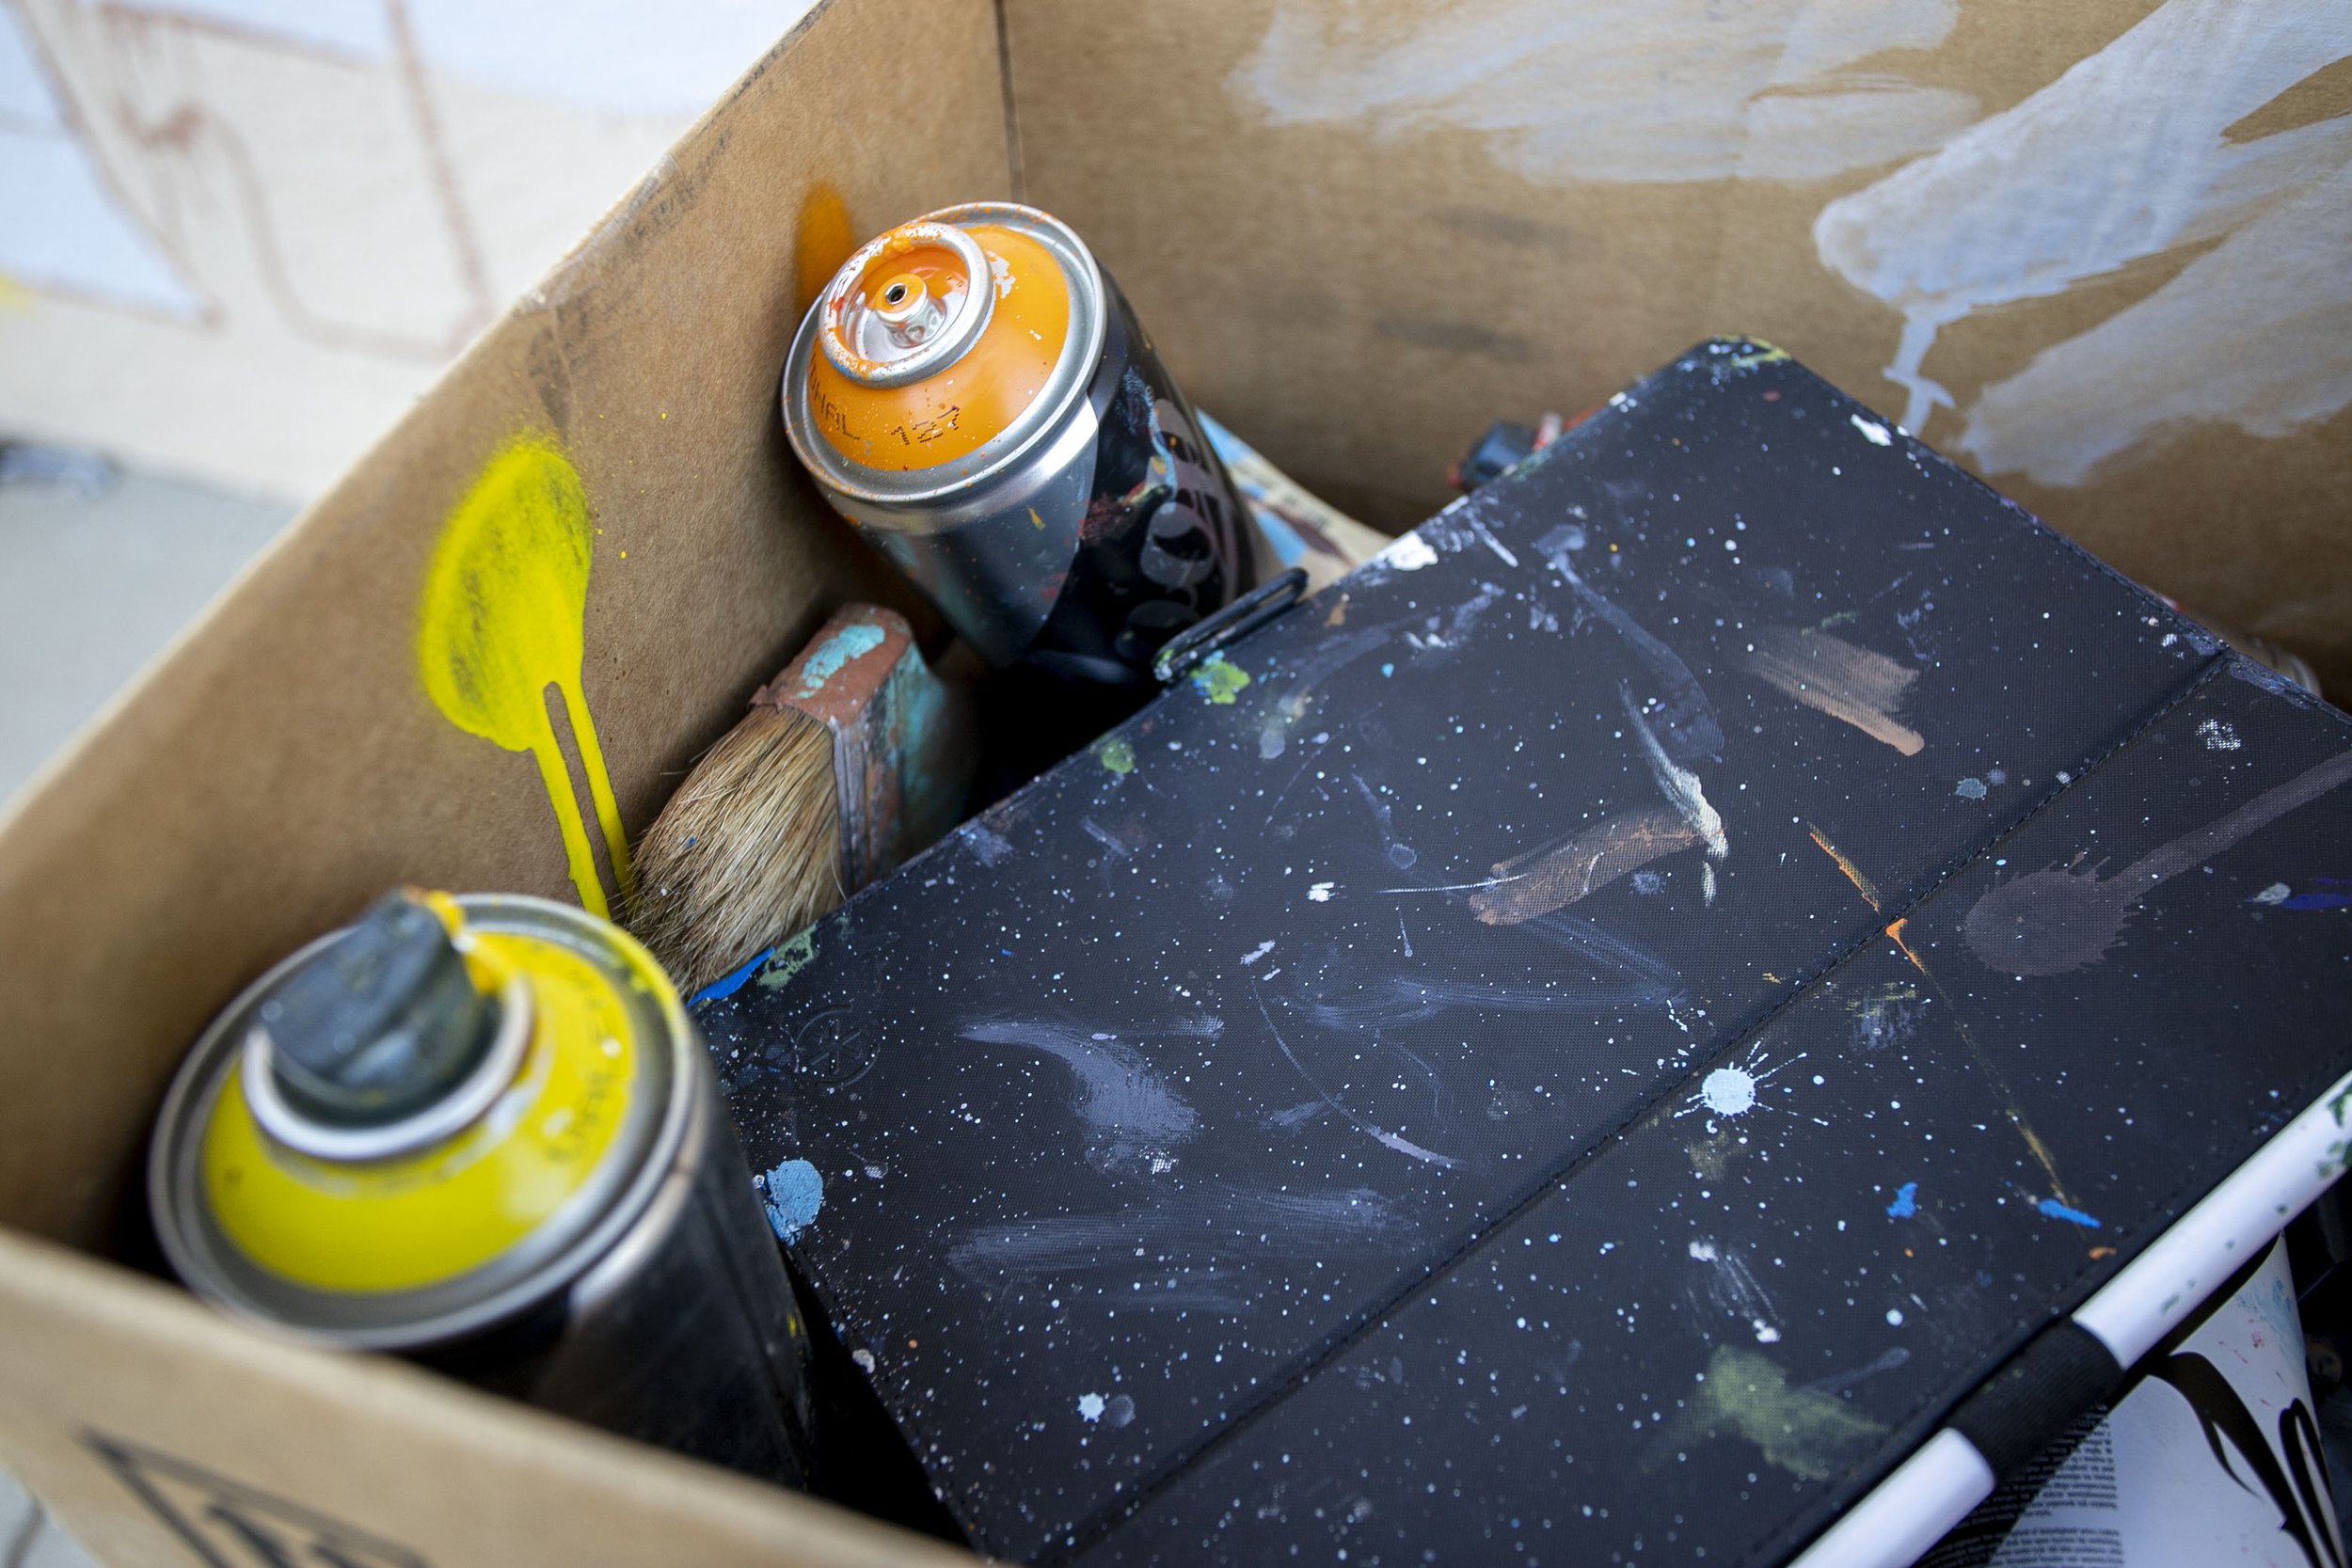  Juan Pablo Reyes' materials, which include spray cans, brushes, and an iPad on February 25, 2022 in Pacoima, Calif. 